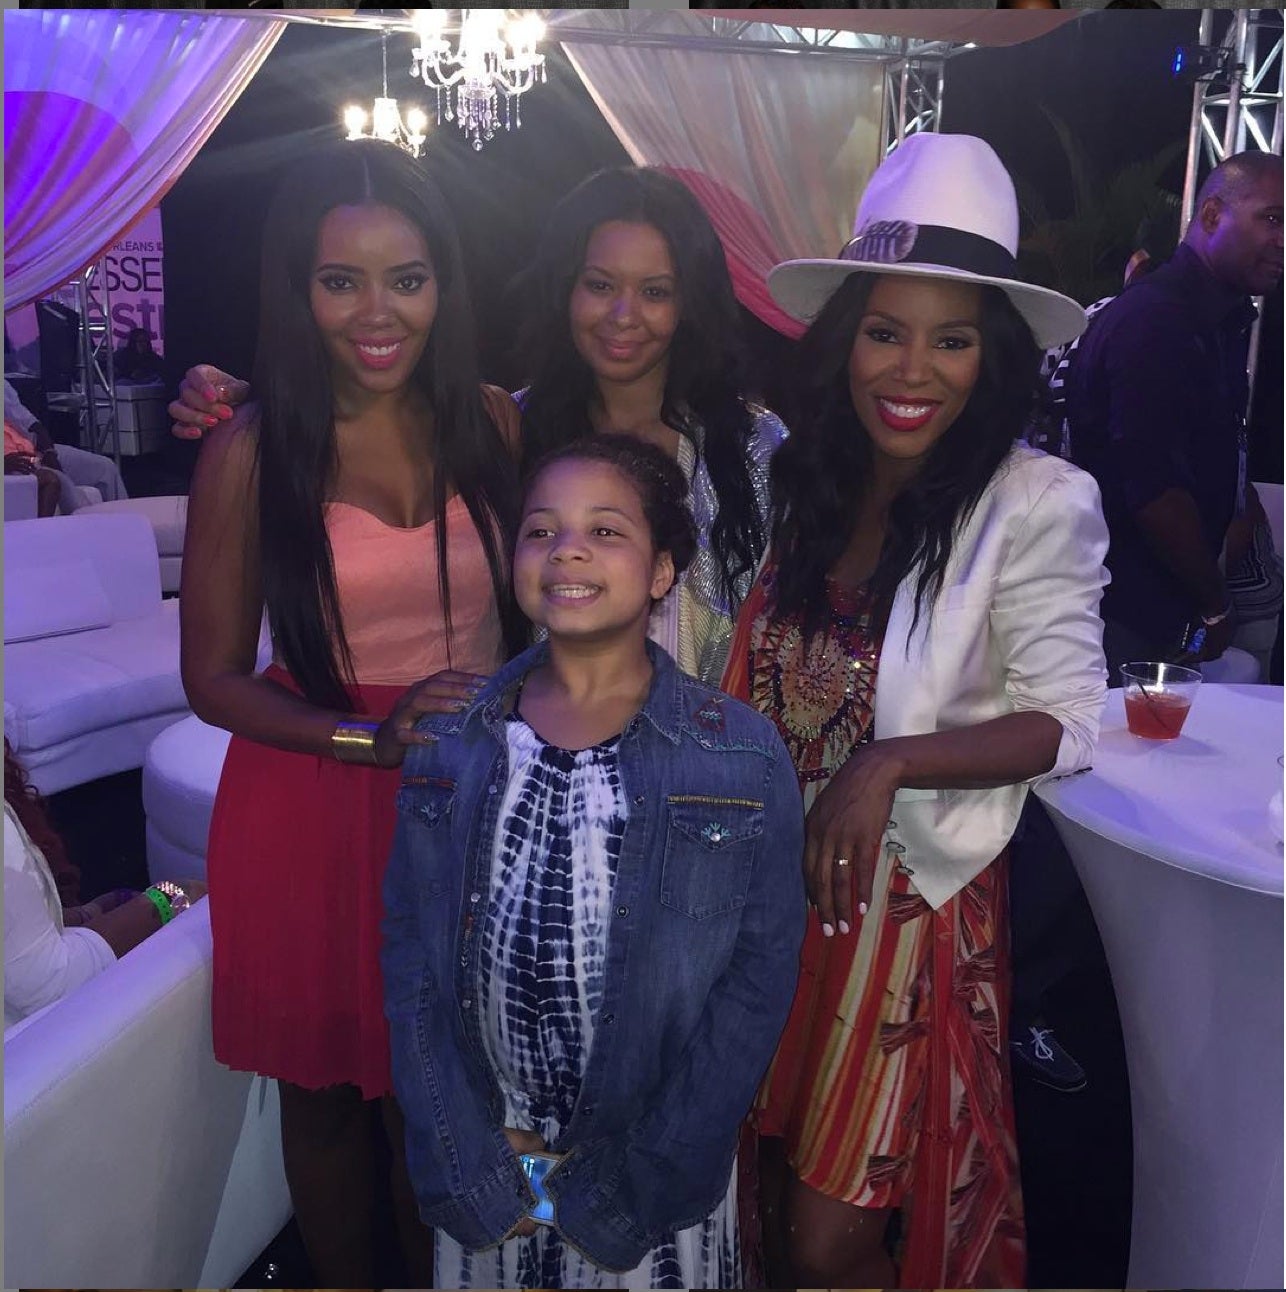 Celeb Friends at ESSENCE Fest: See How They #BringTheLove